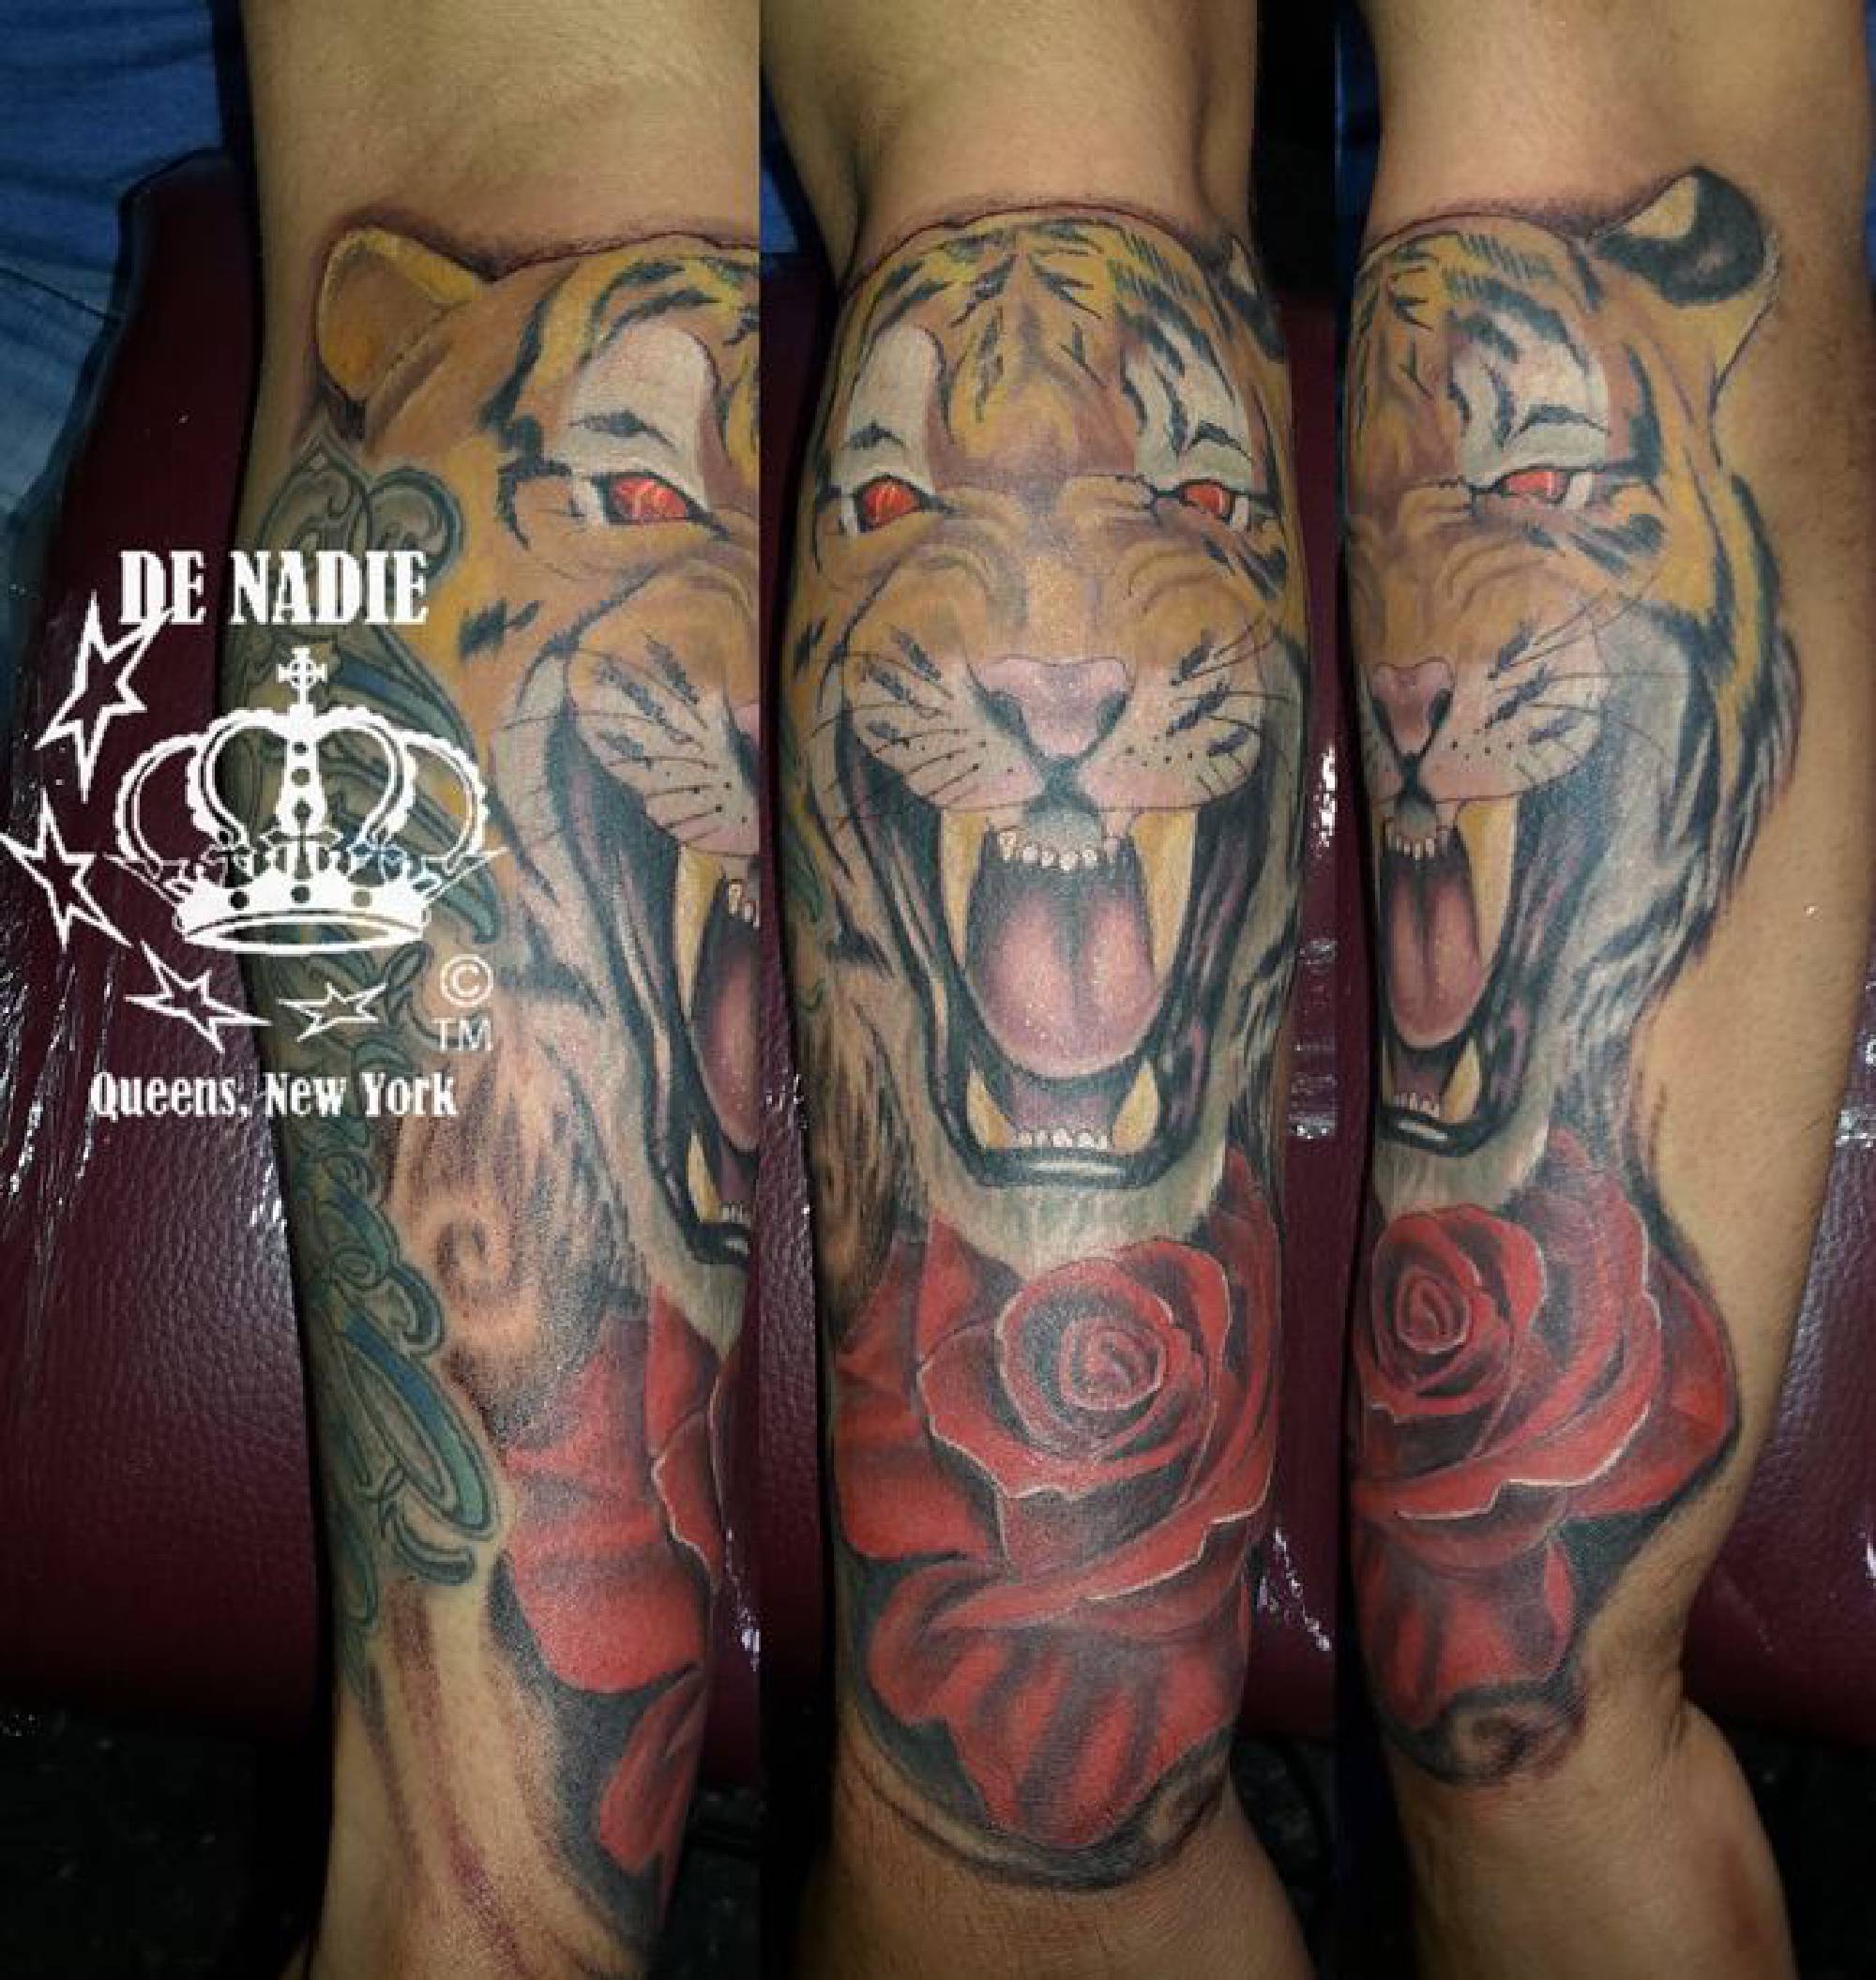 Tiger and rose tattoo